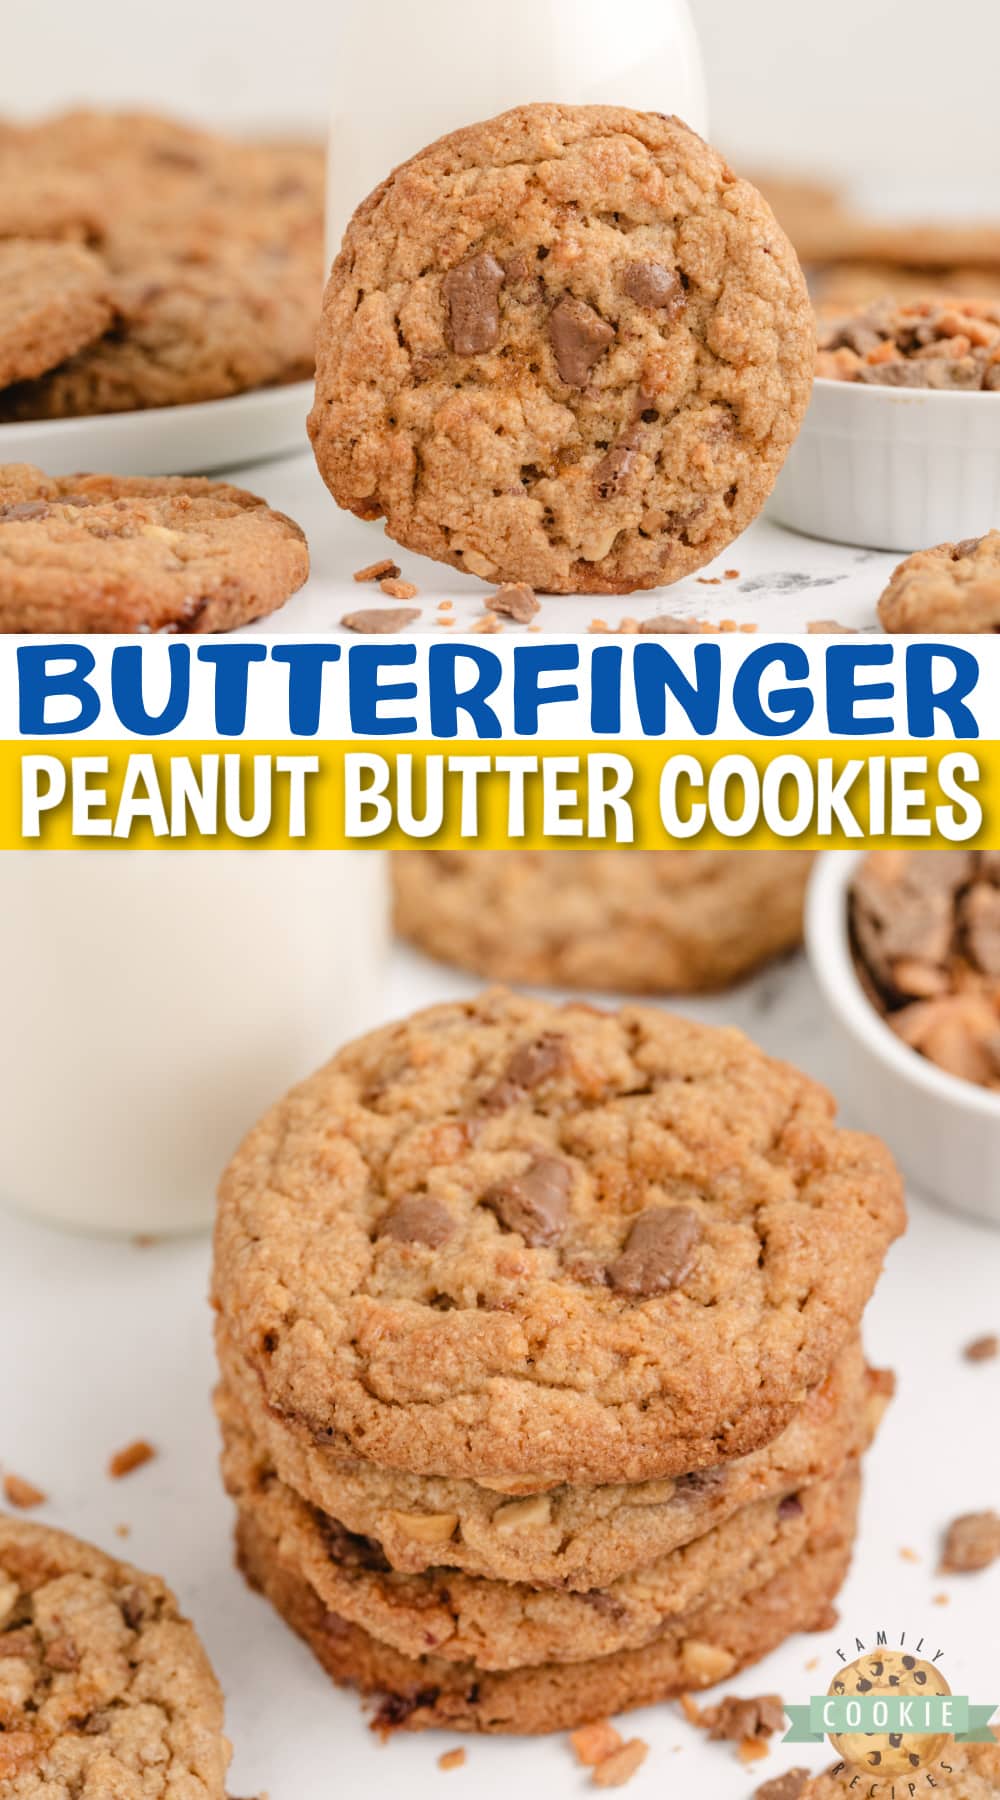 Butterfinger Peanut Butter Cookies are amazingly soft, chewy, and full of crunchy peanut butter and chunks of Butterfinger candy bars!